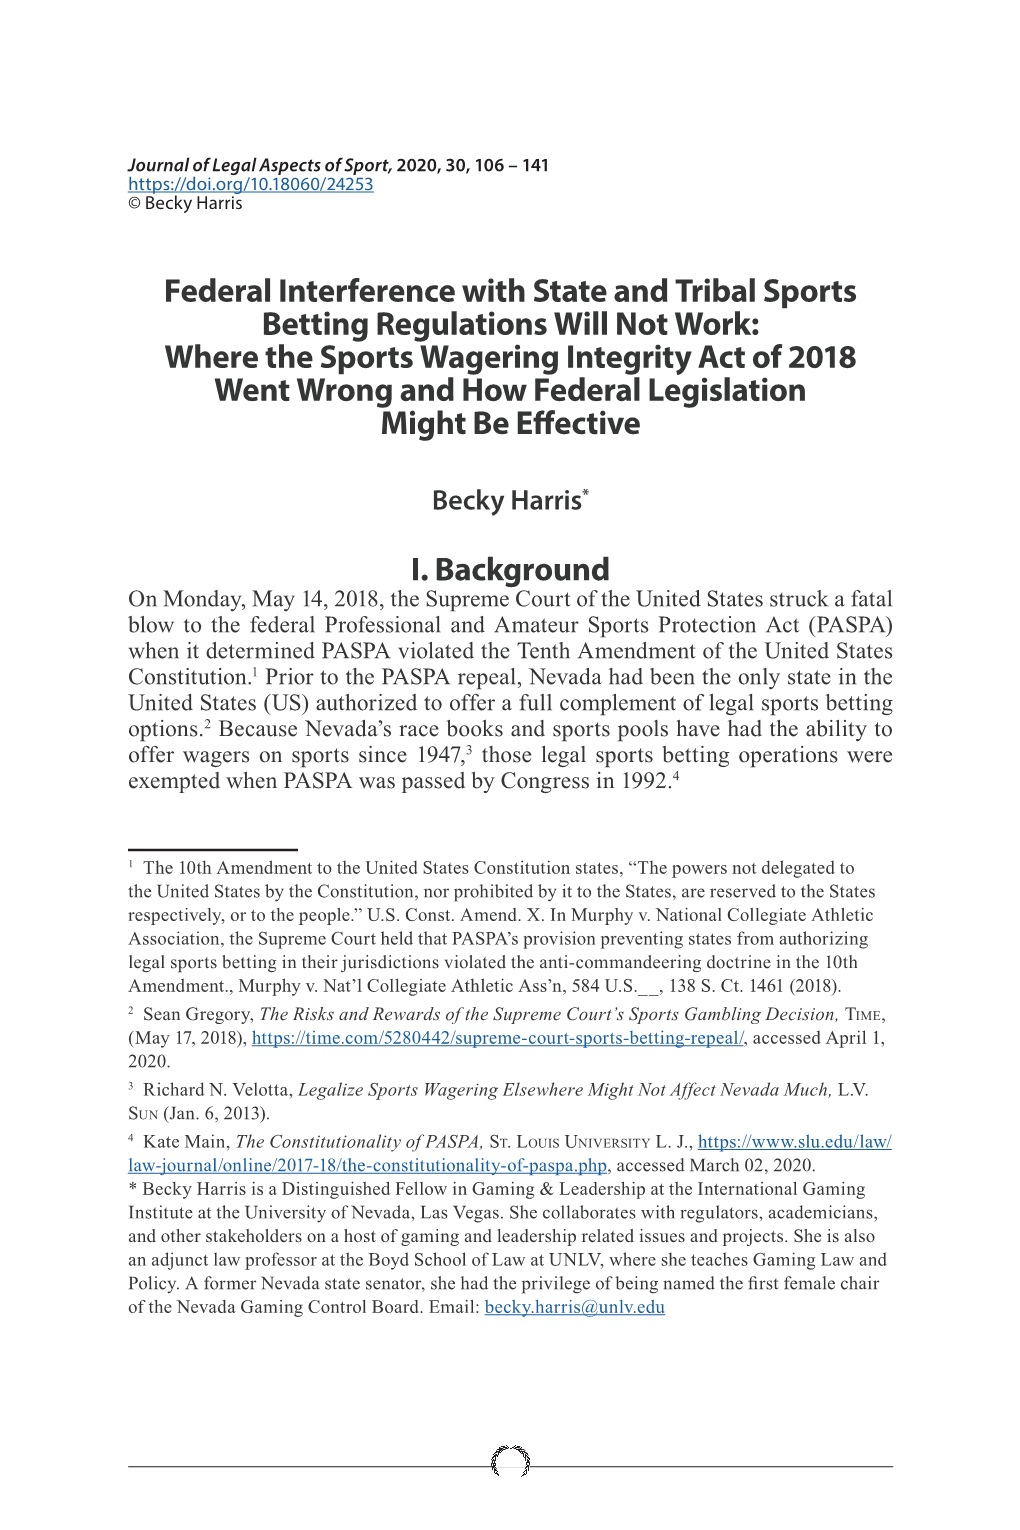 Federal Interference with State and Tribal Sports Betting Regulations